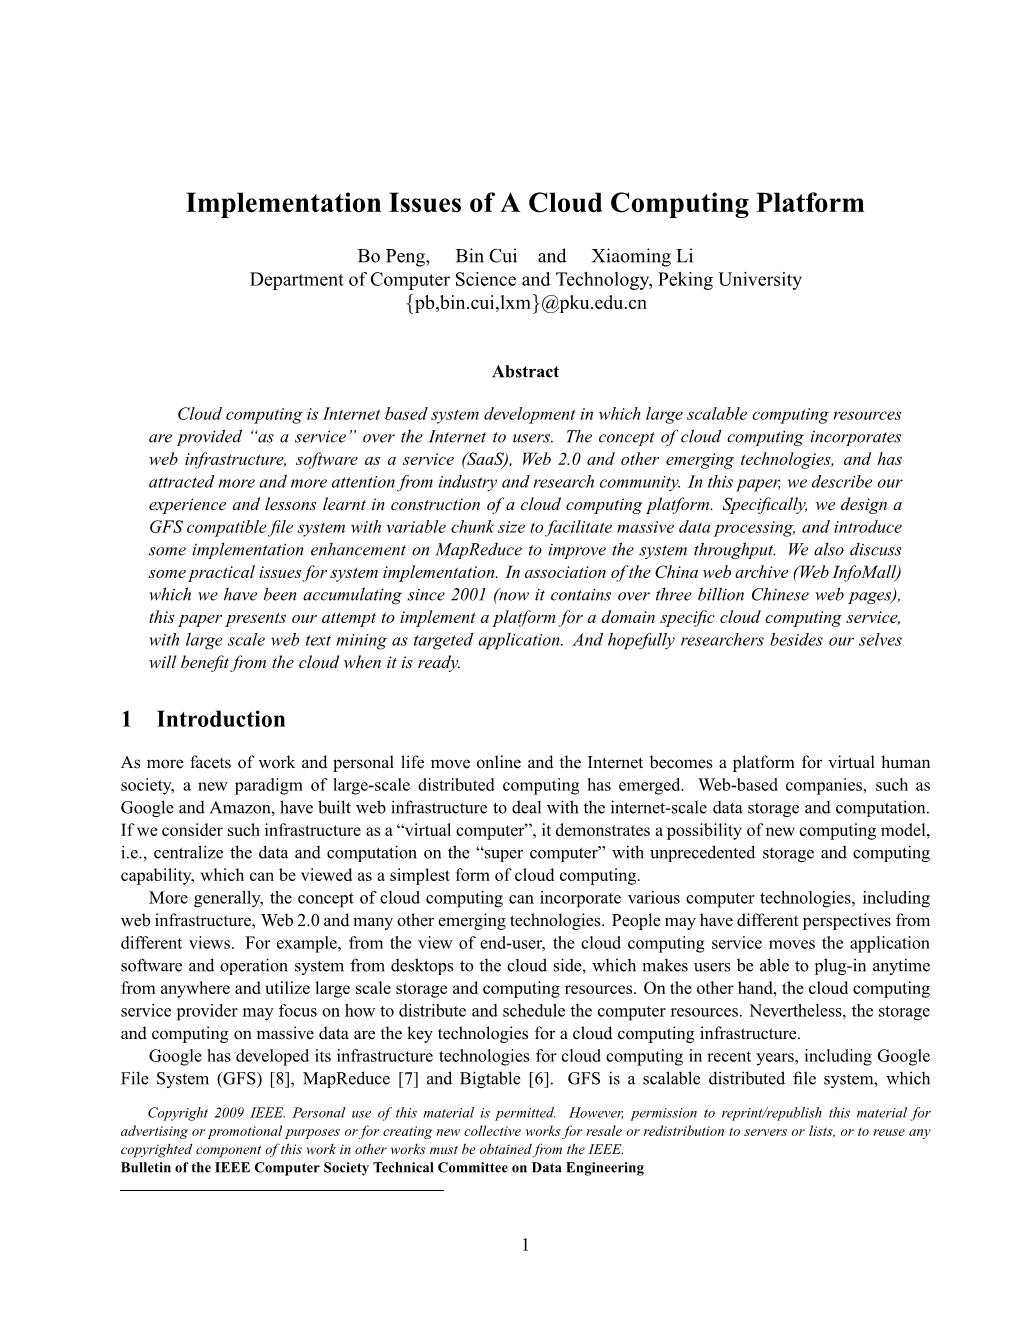 Implementation Issues of a Cloud Computing Platform